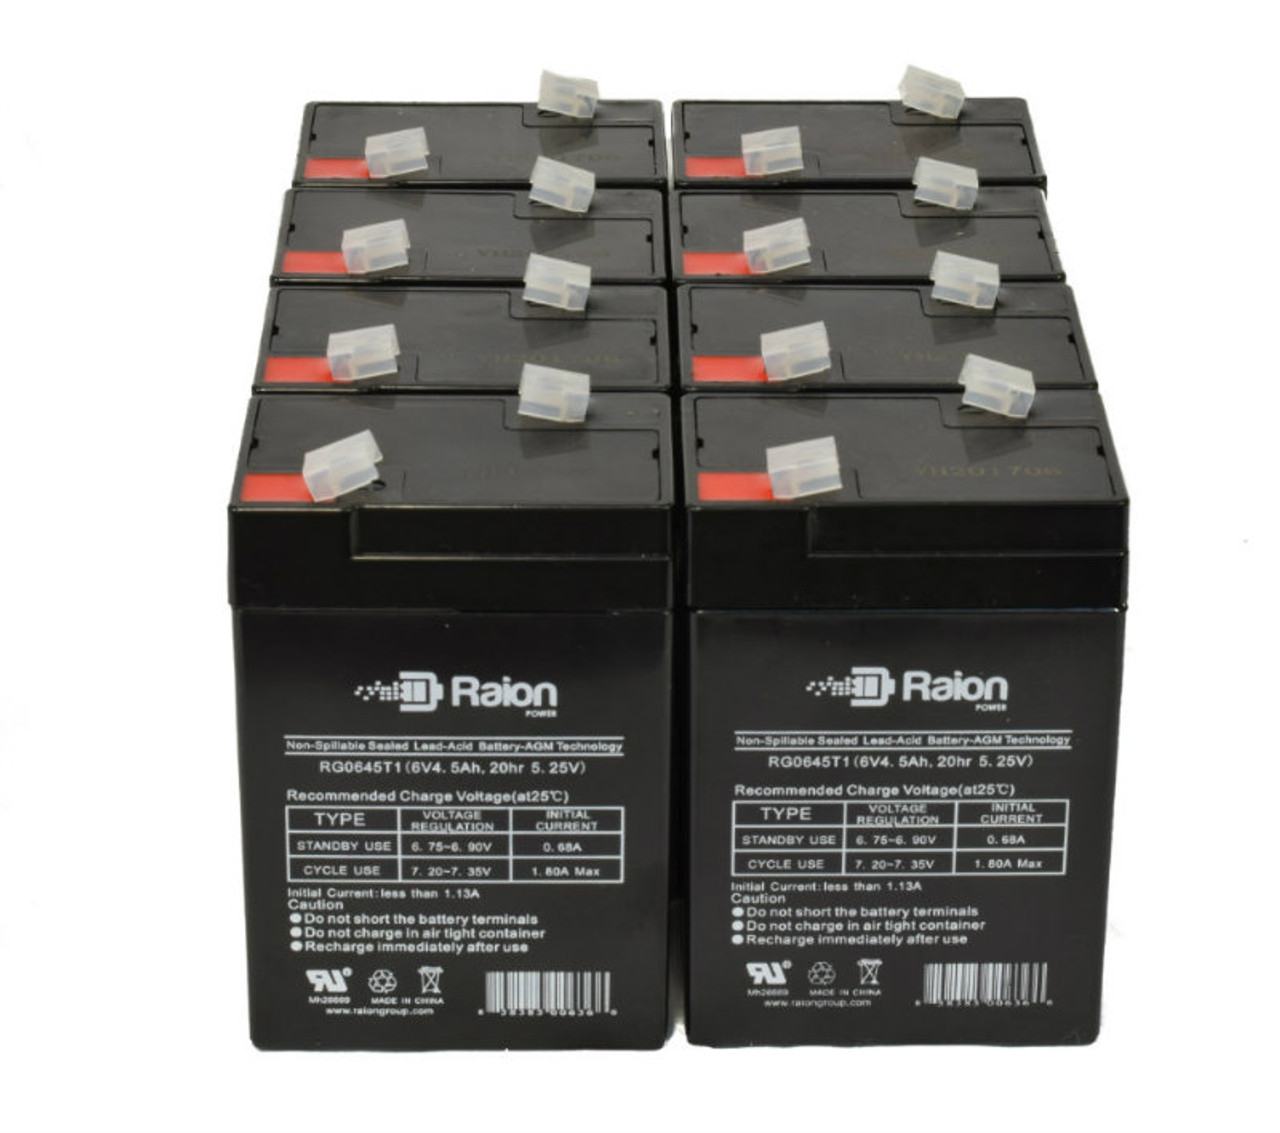 Raion Power RG0645T1 6V 4.5Ah Replacement Medical Equipment Battery for Alaris Medical 4400 Vital Check Monitor - 8 Pack